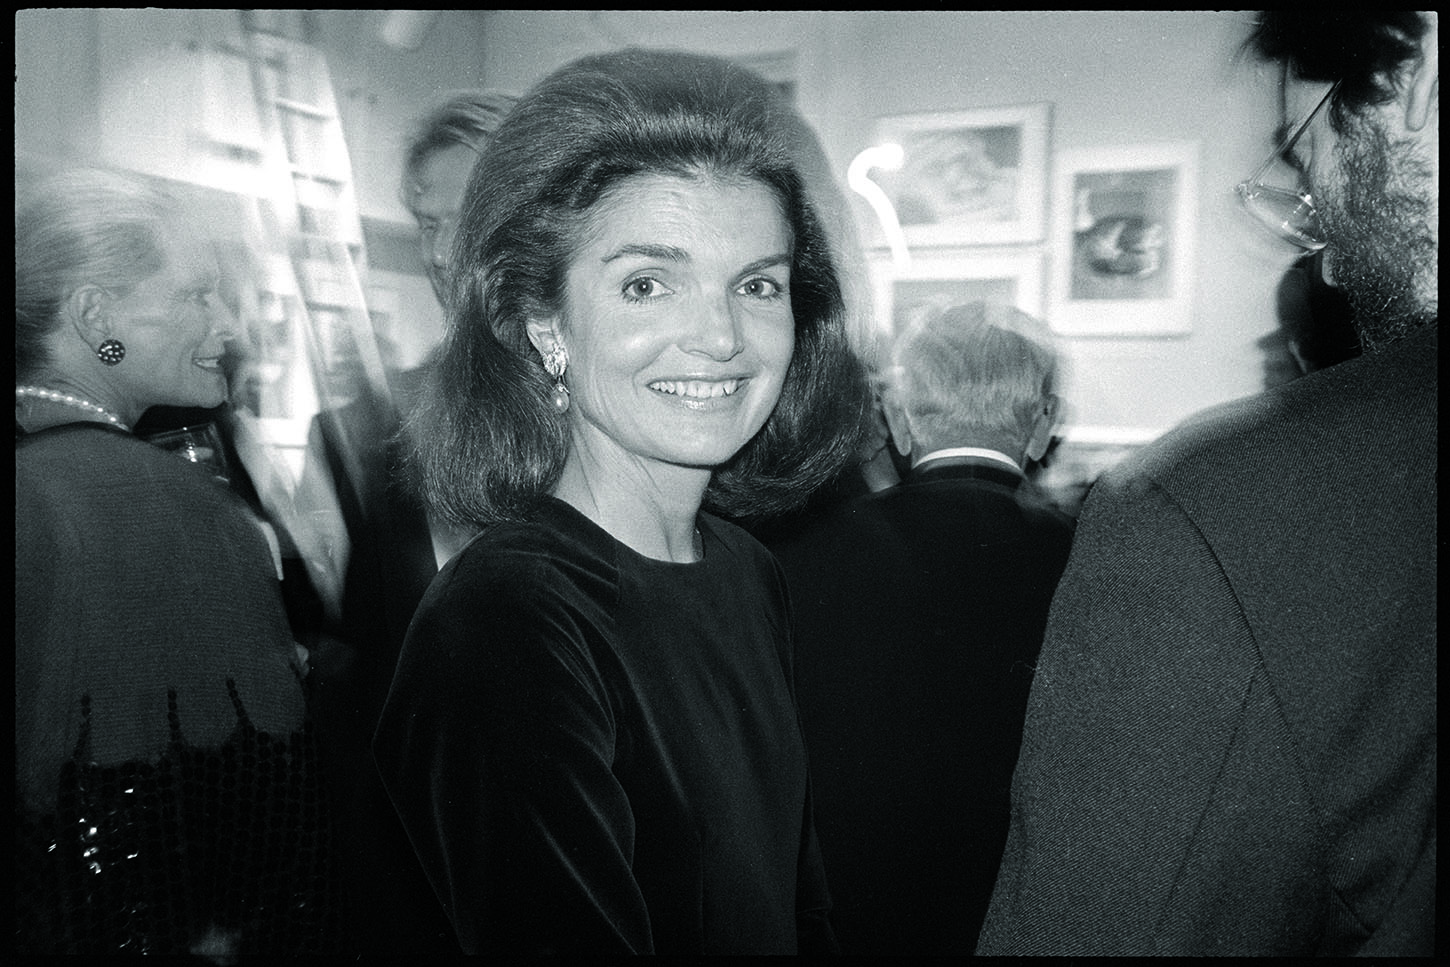 Andy Warhol (U.S.A., 1928–1987), Negative [Jackie Kennedy Onassis at the party for Diana Vreeland's book "Allure" at ICP], 1980, Black-and-white negatives. Cantor Arts Center collection, Gift of The Andy Warhol Foundation for the Visual Arts, 2014.41.417_5. © The Andy Warhol Foundation for the Visual Arts, Inc.